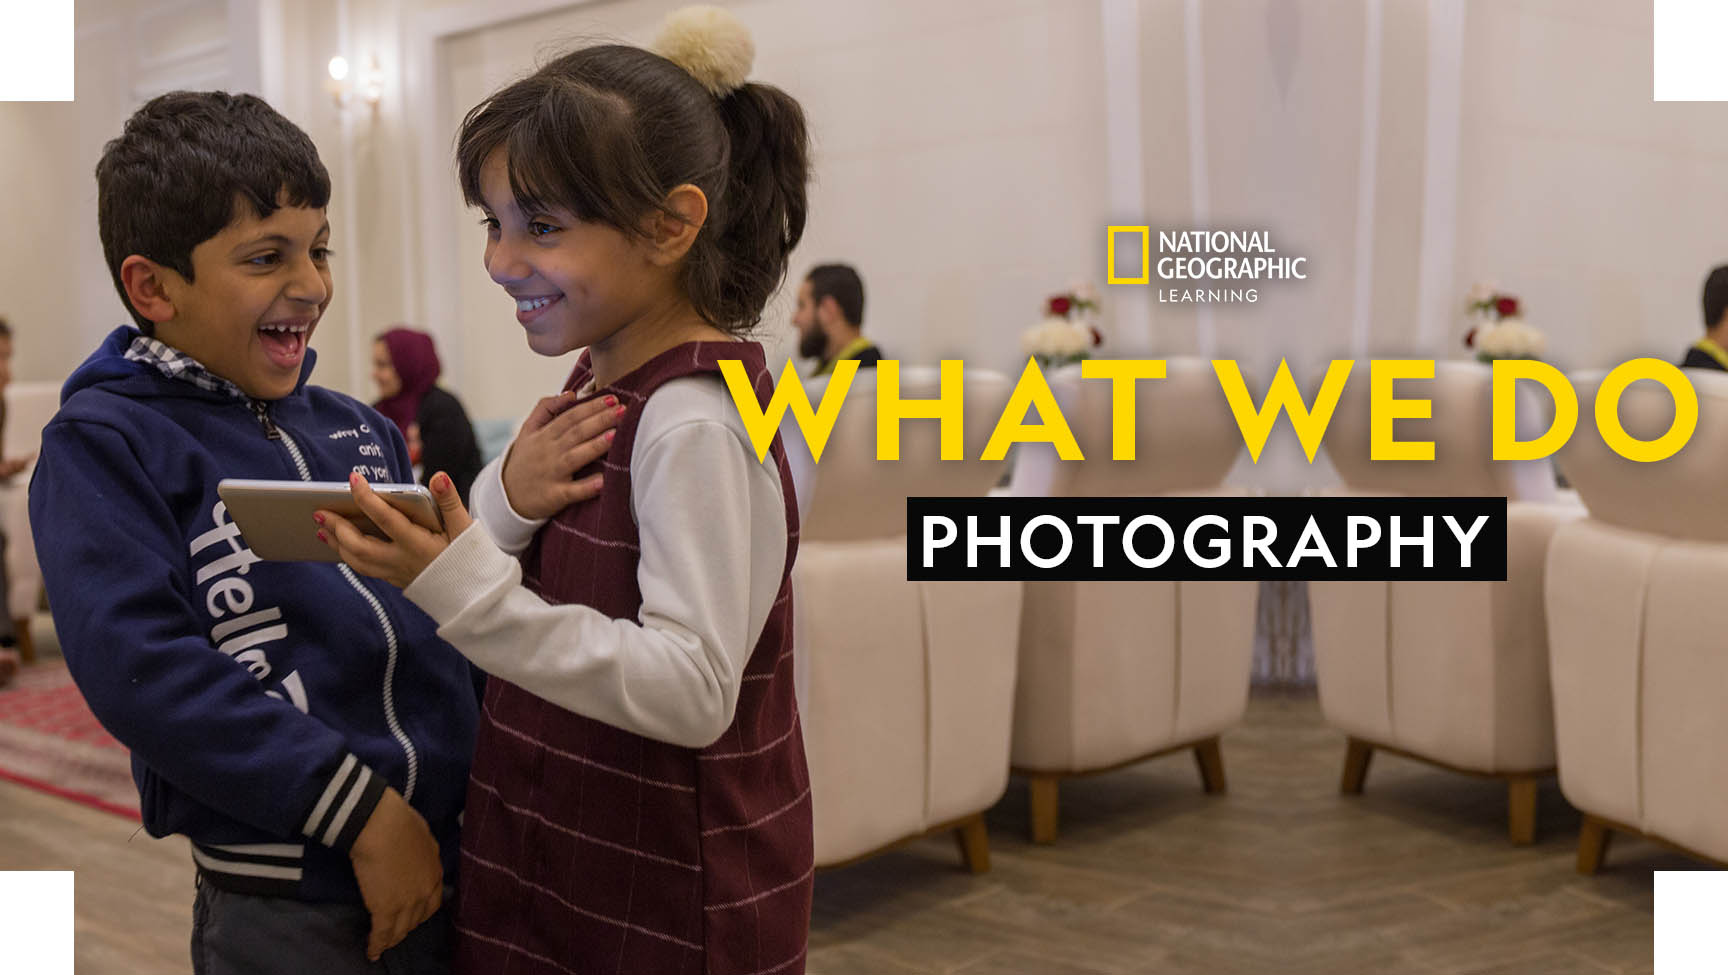 About National Geographic Learning And Photography